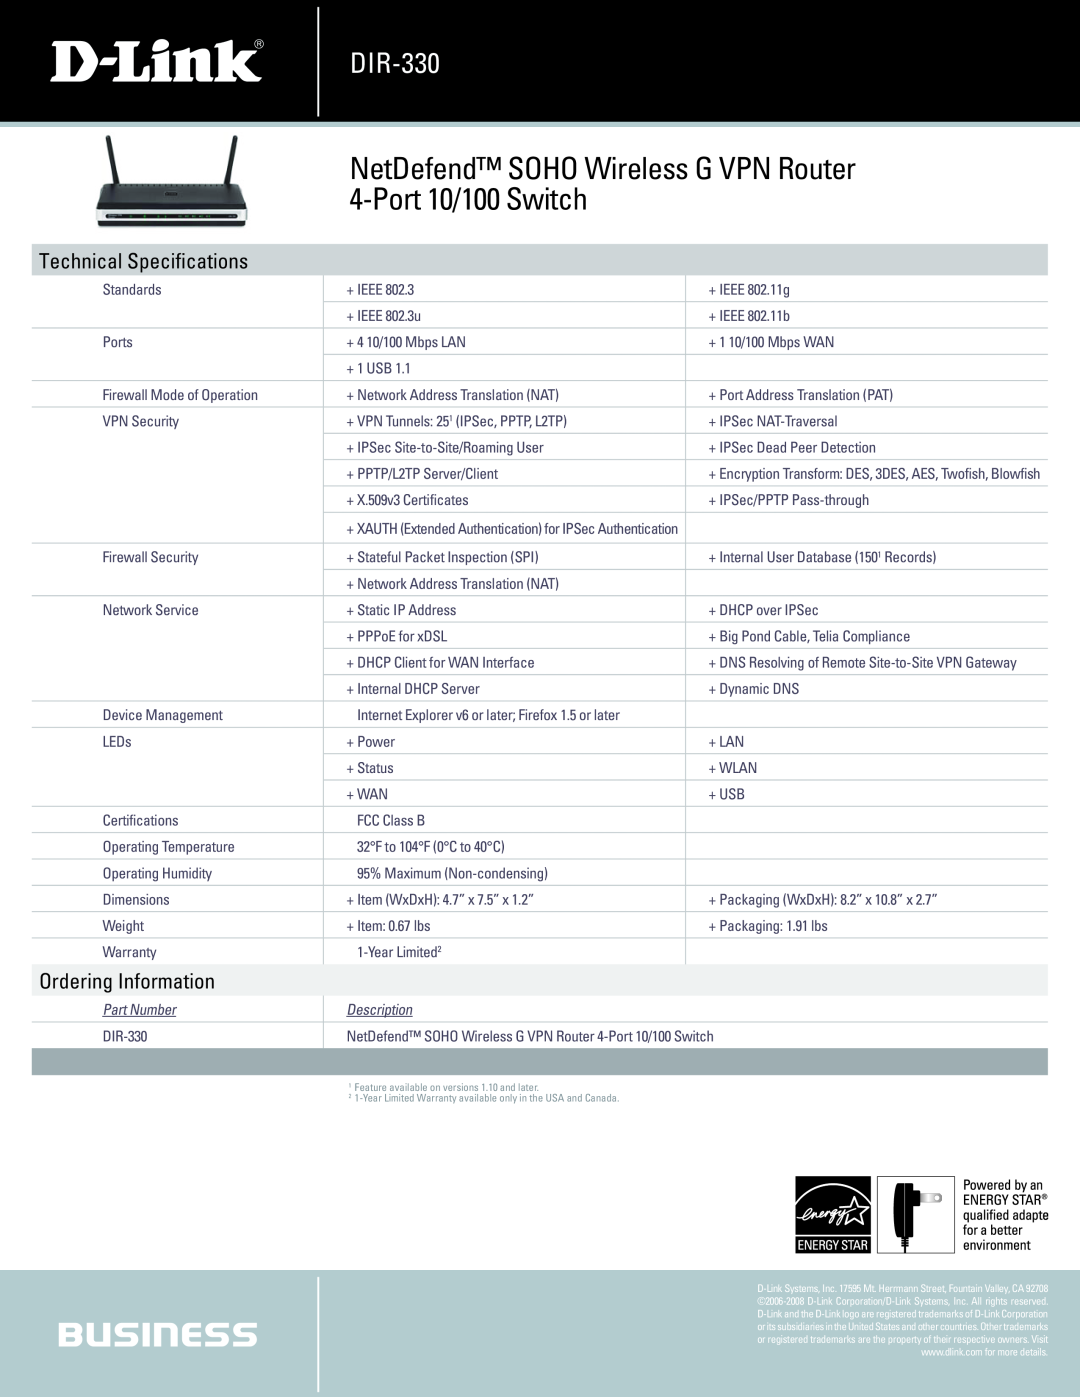 D-Link DIR-330 Technical Specifications, NetDefend SOHO Wireless G VPN Router 4-Port 10/100 Switch, Ordering Information 